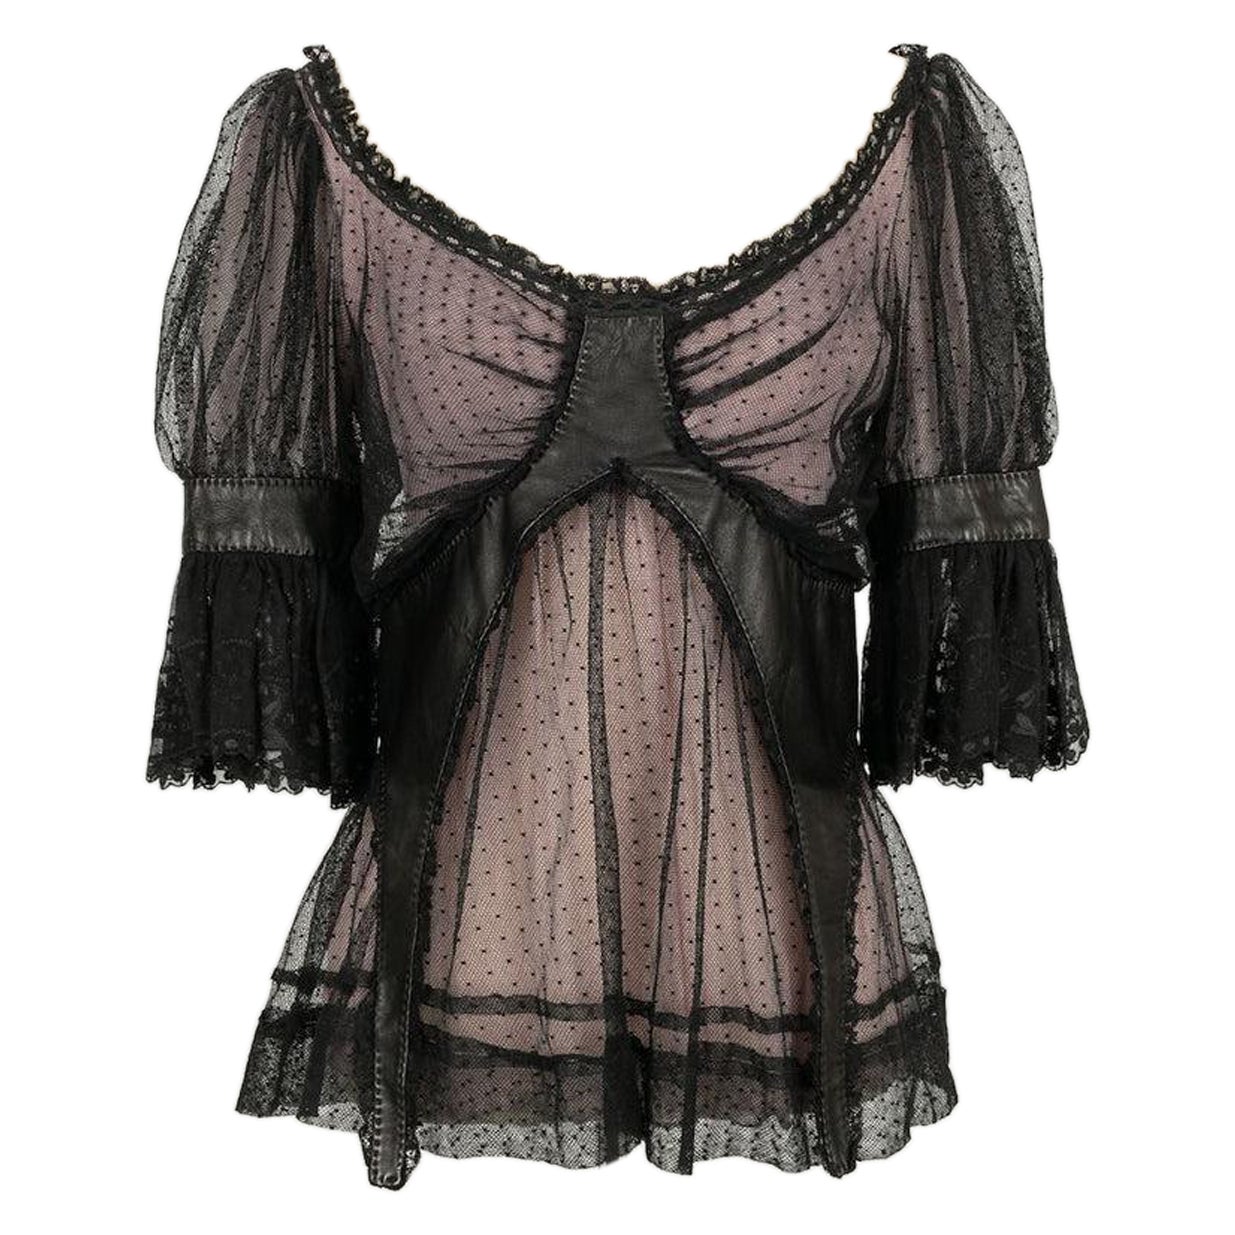 Alexander Mcqueen Lace Top with Polka Dots and Black Leather, 2005 For Sale